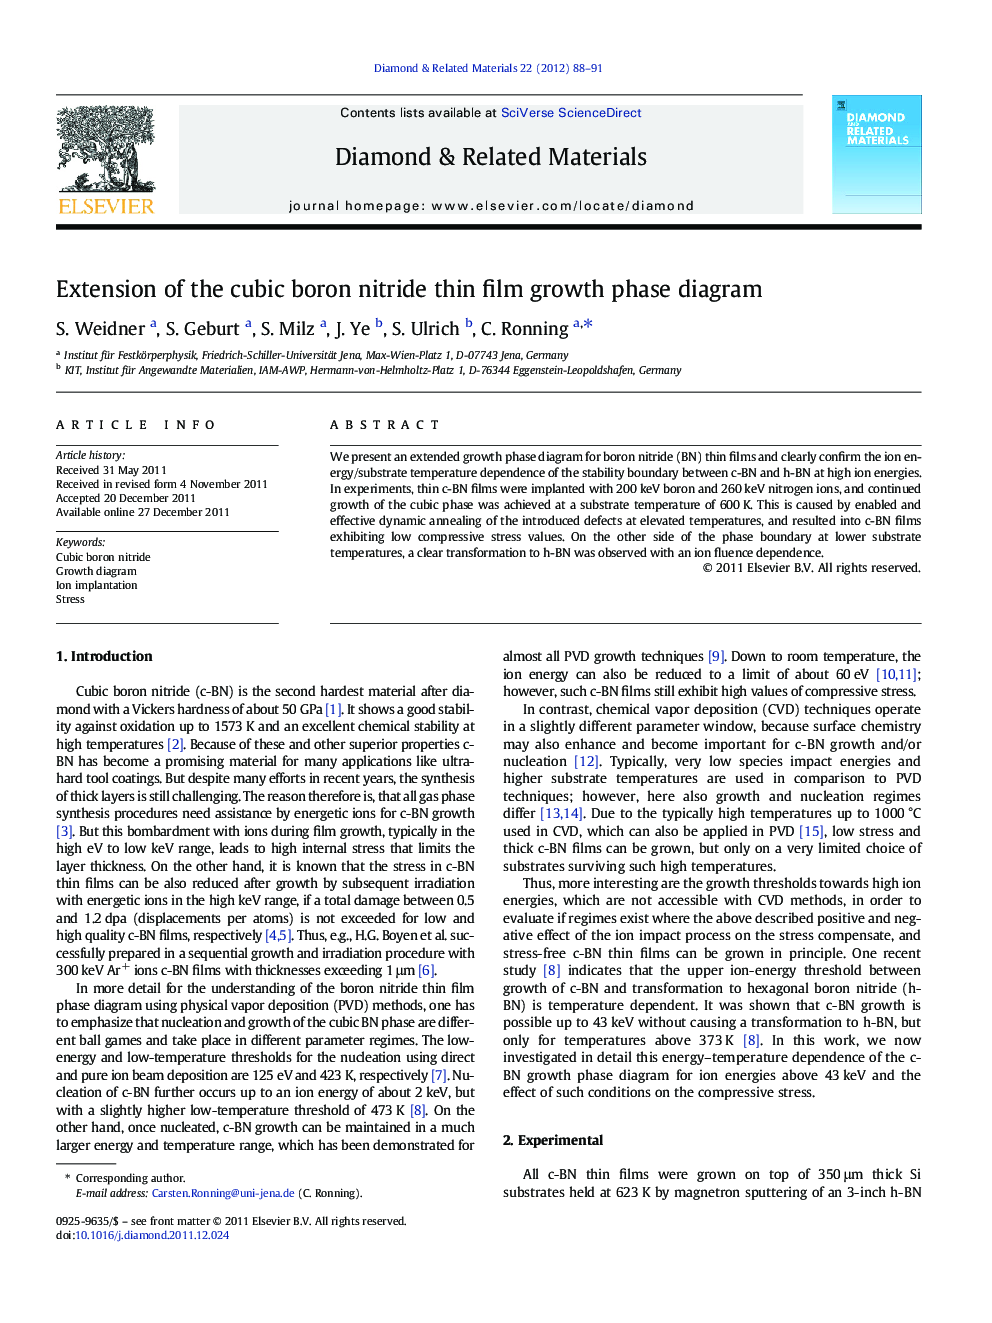 Extension of the cubic boron nitride thin film growth phase diagram